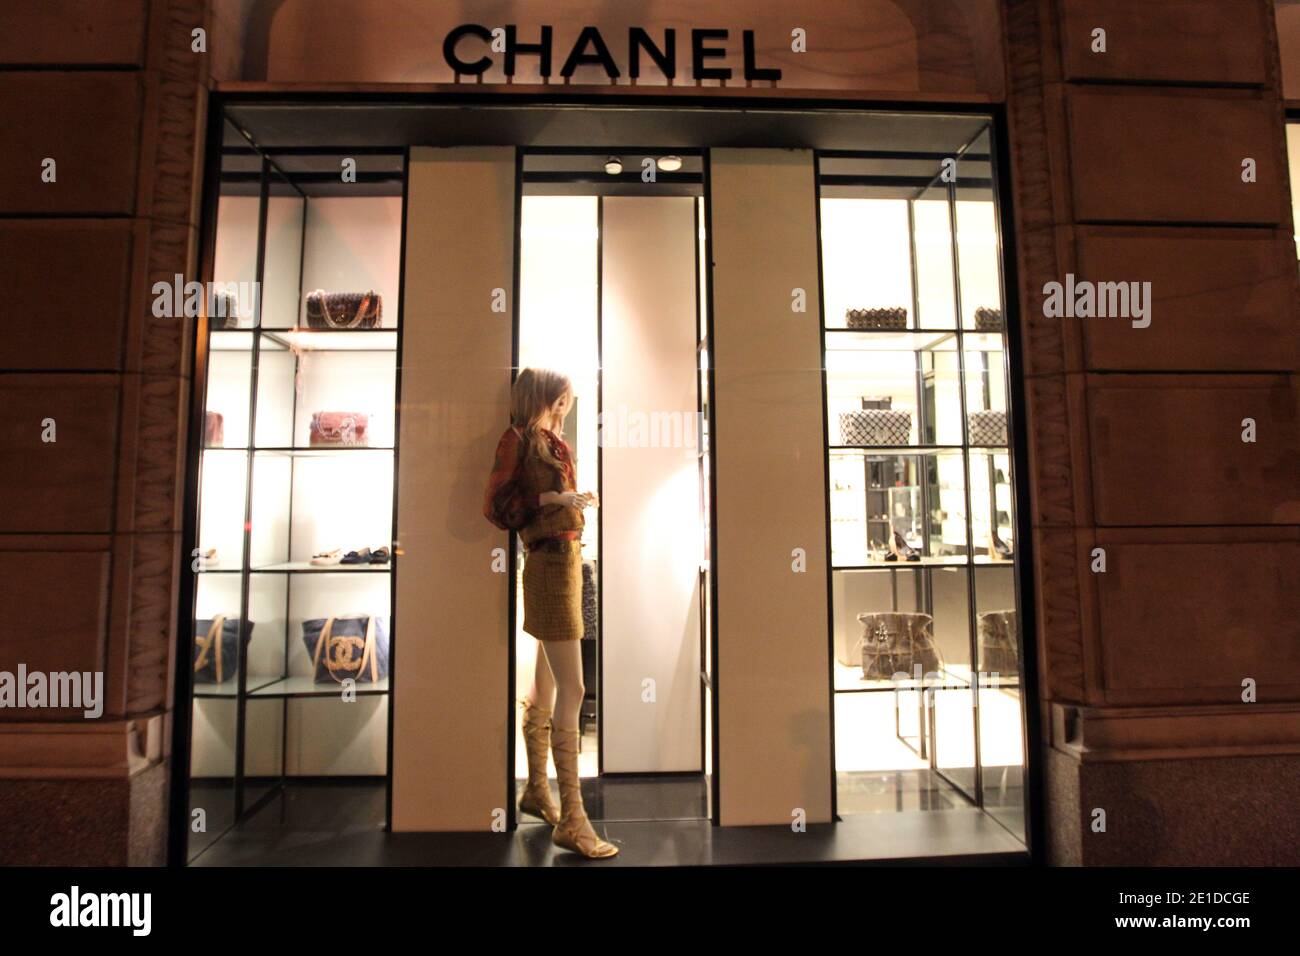 chanel 57th street hours